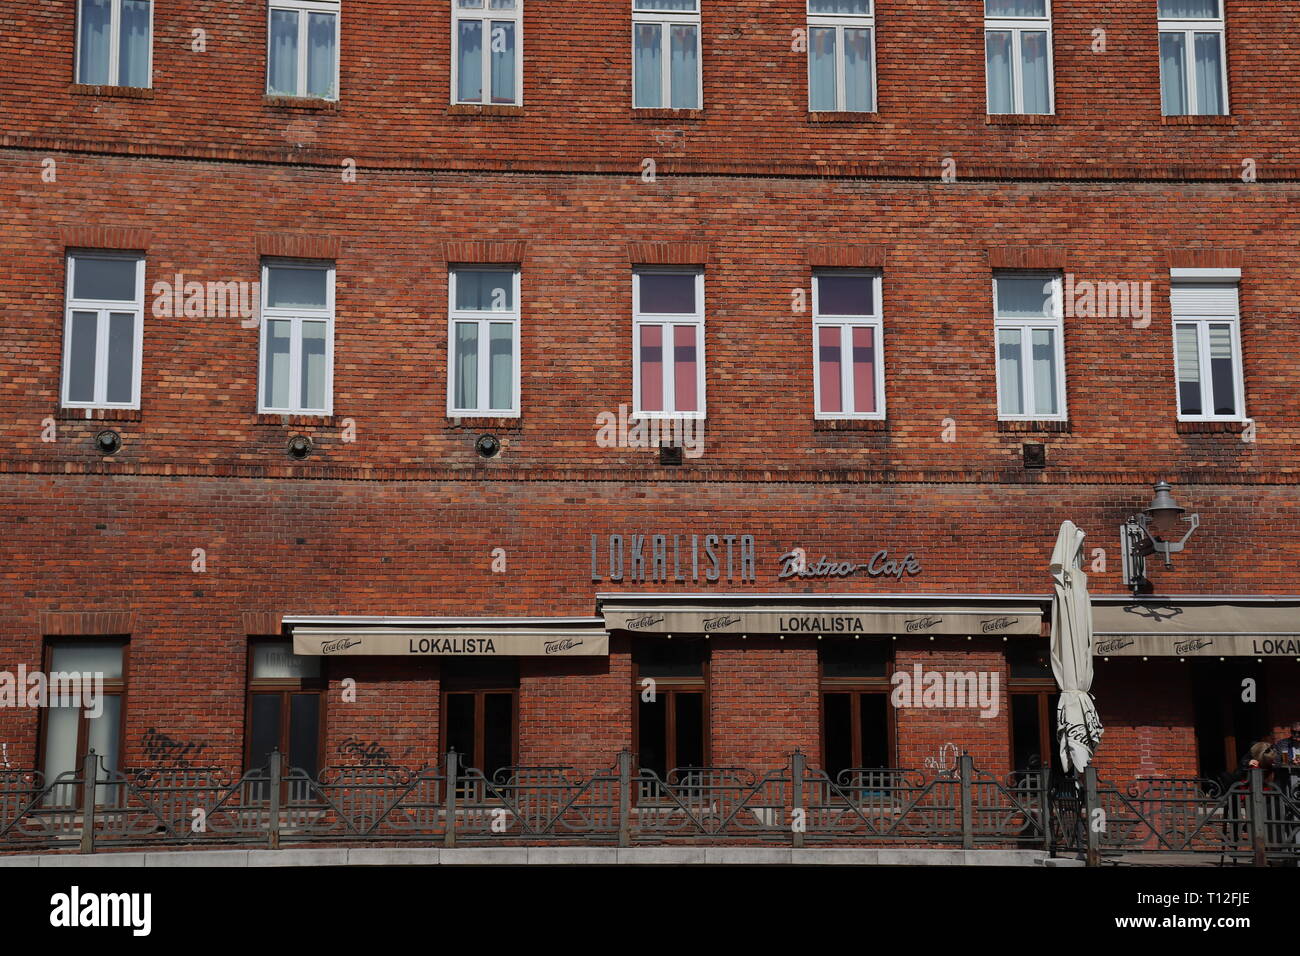 An old factory building revived as lofts. Brick walls with white windows. Stock Photo